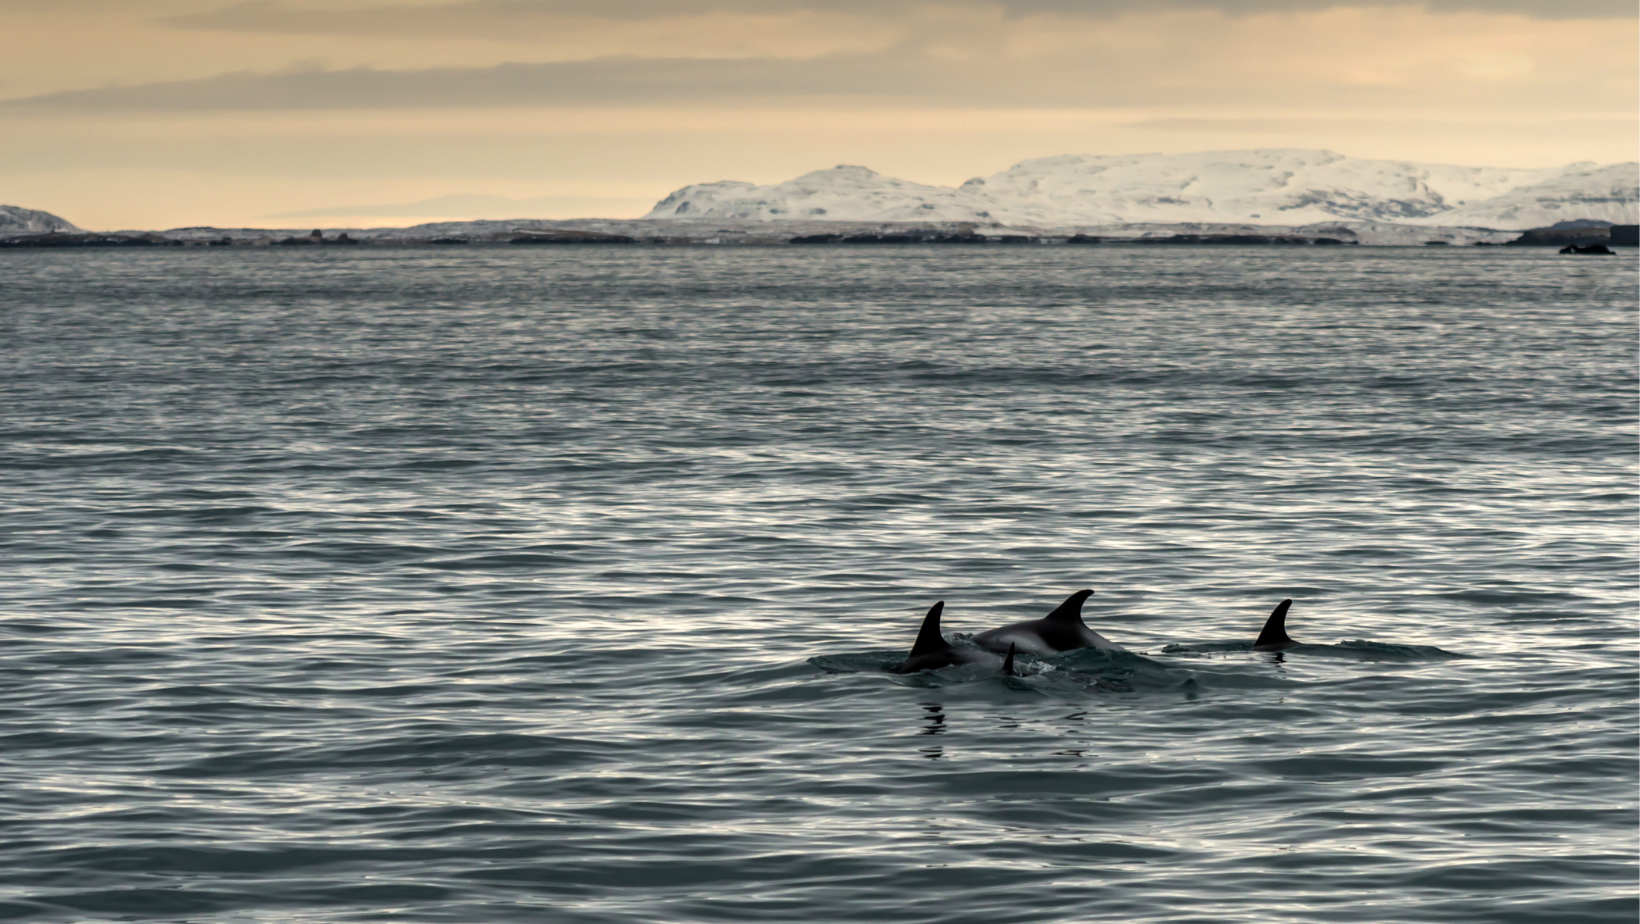 Pod of dolphins off the coast of Iceland with snowy peaks in the background